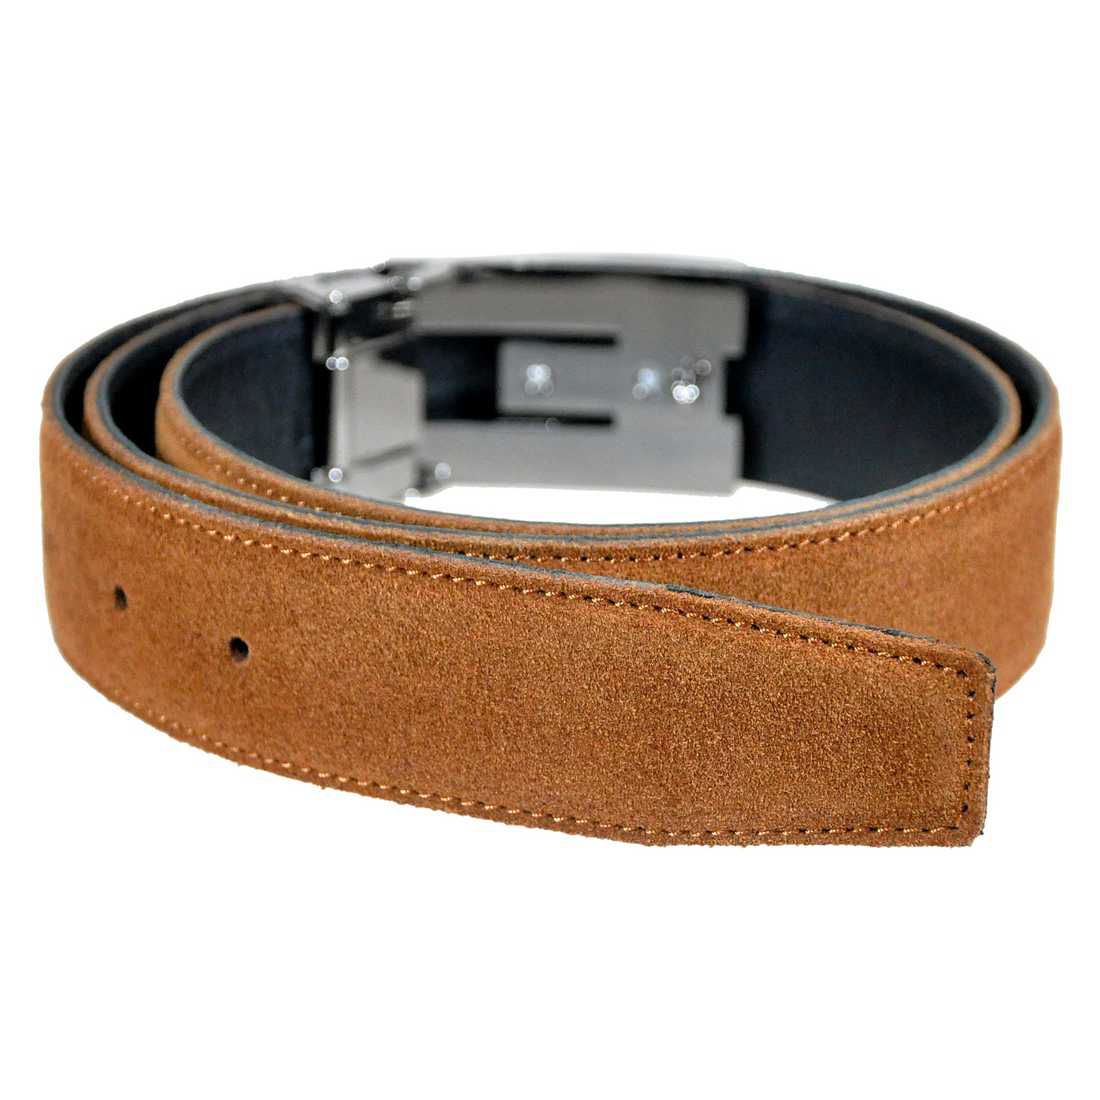 OHM New York Suede Leather Belts with Classic Buckle